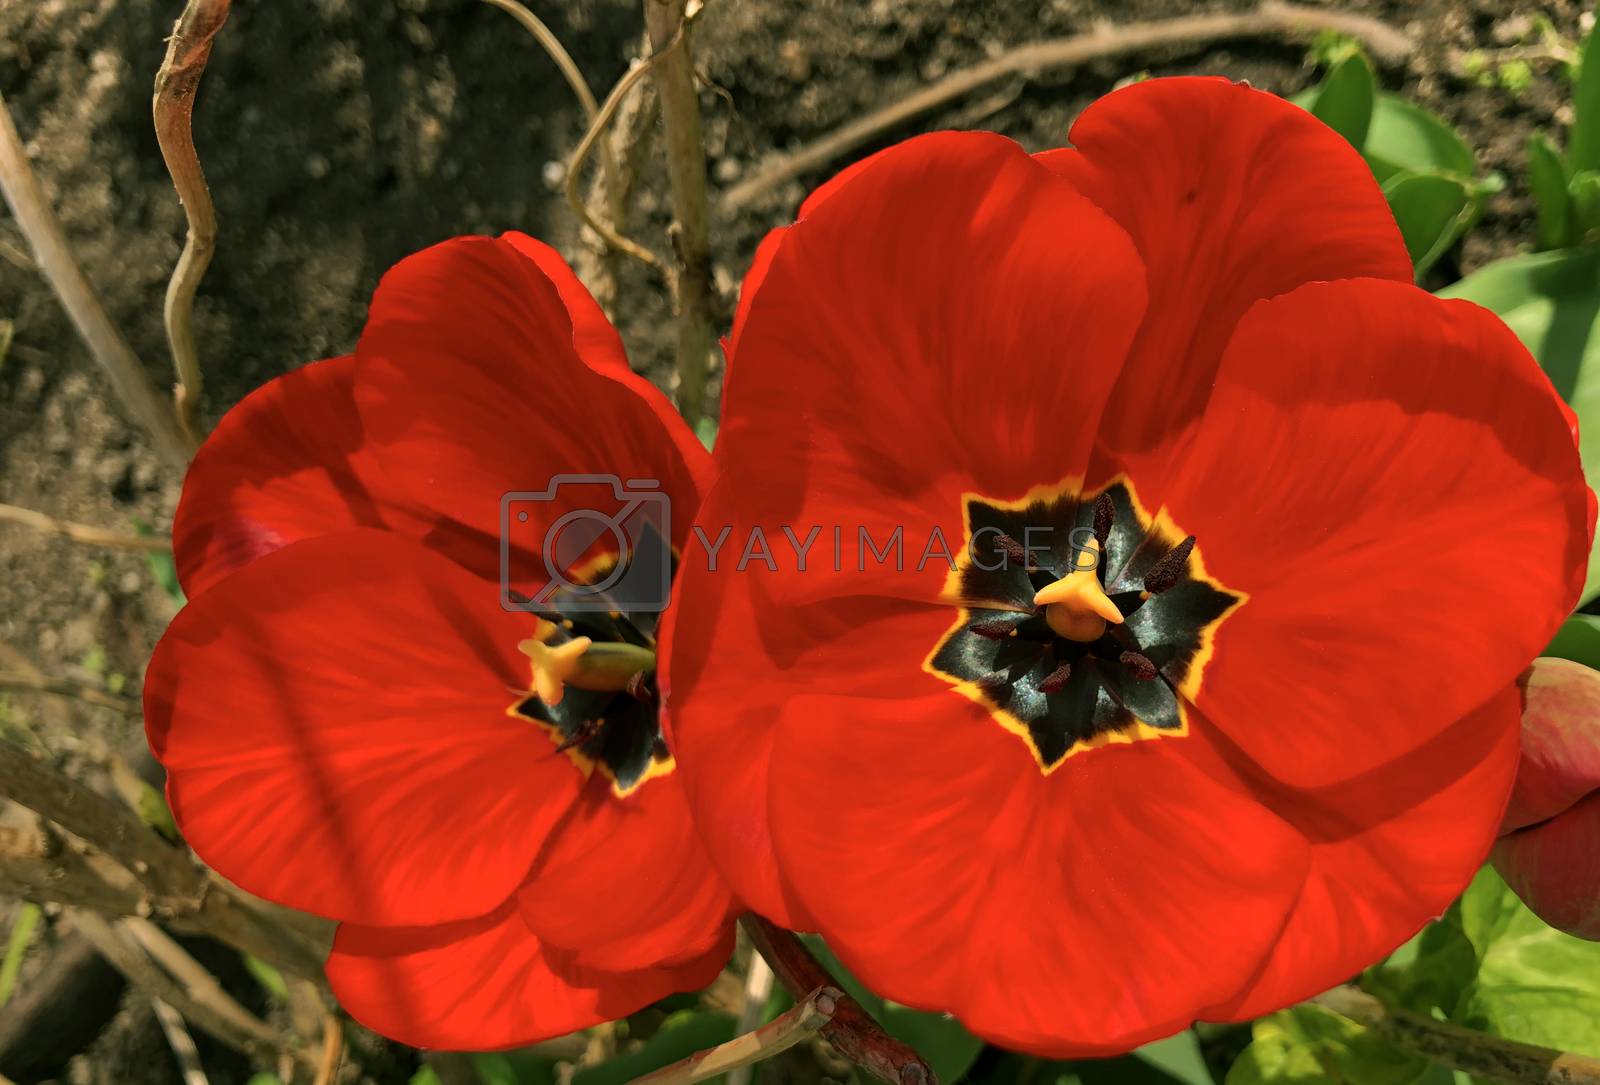 Royalty free image of red tulip in full bloom by F1b0nacci